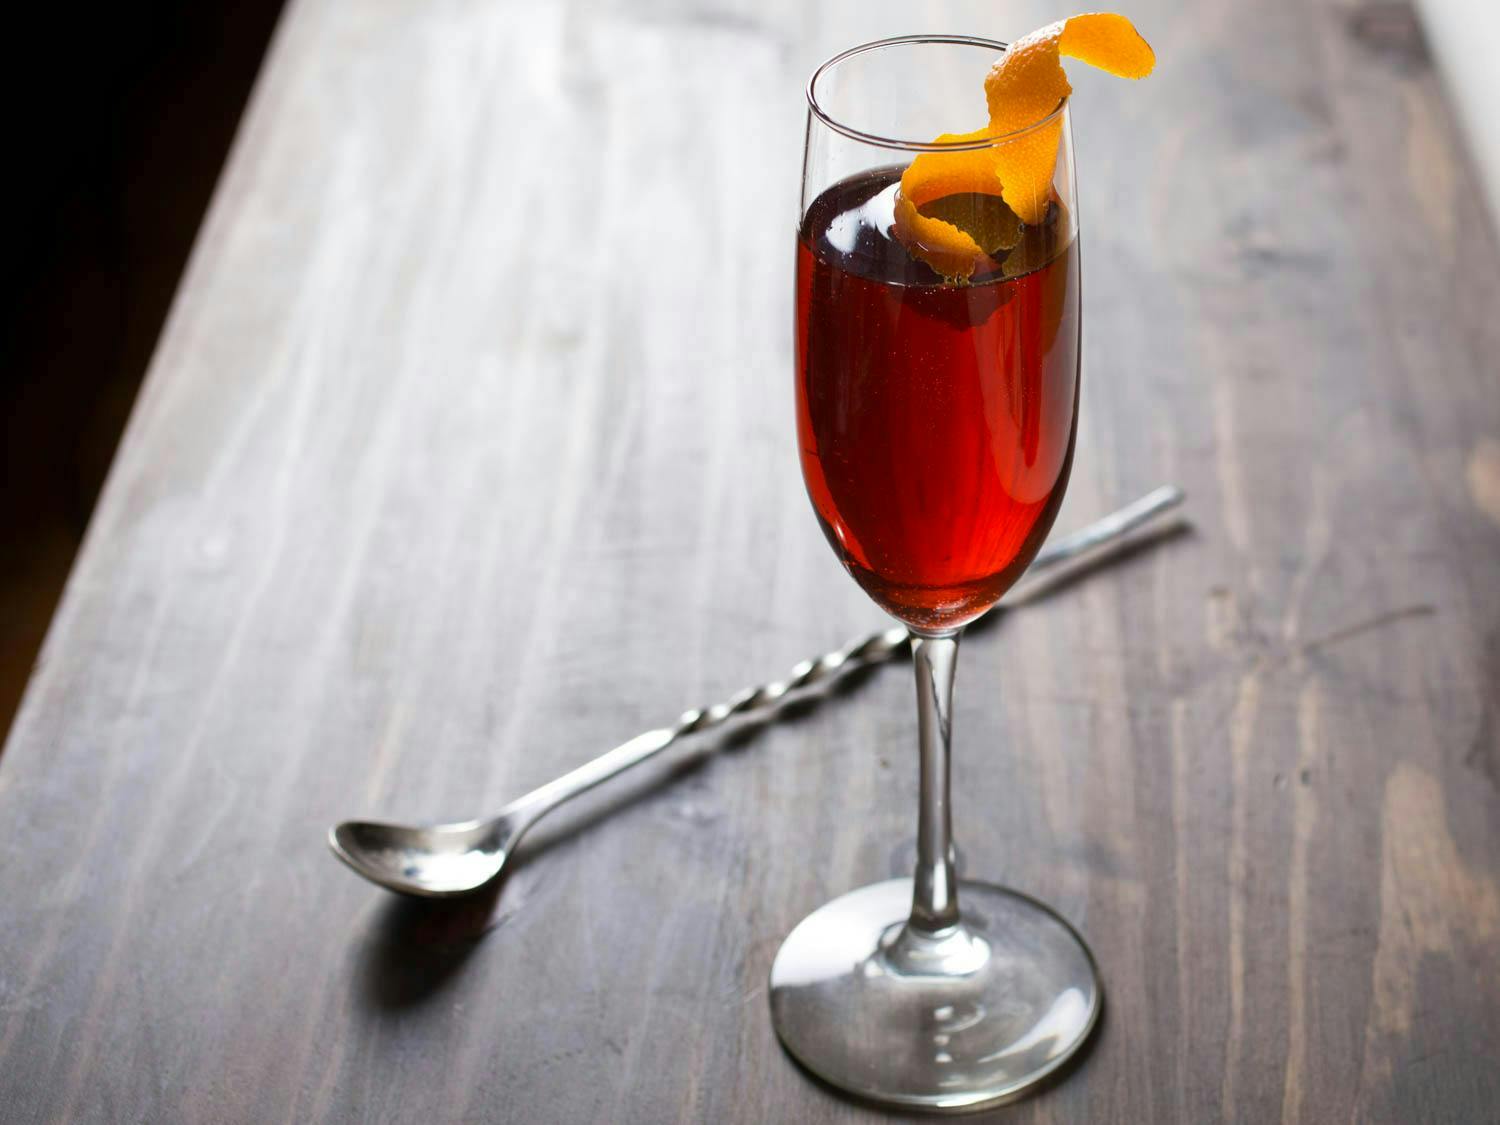 Cocktail of the Week: A Burleigh's Sundowner like a Negroni on gin steroids!